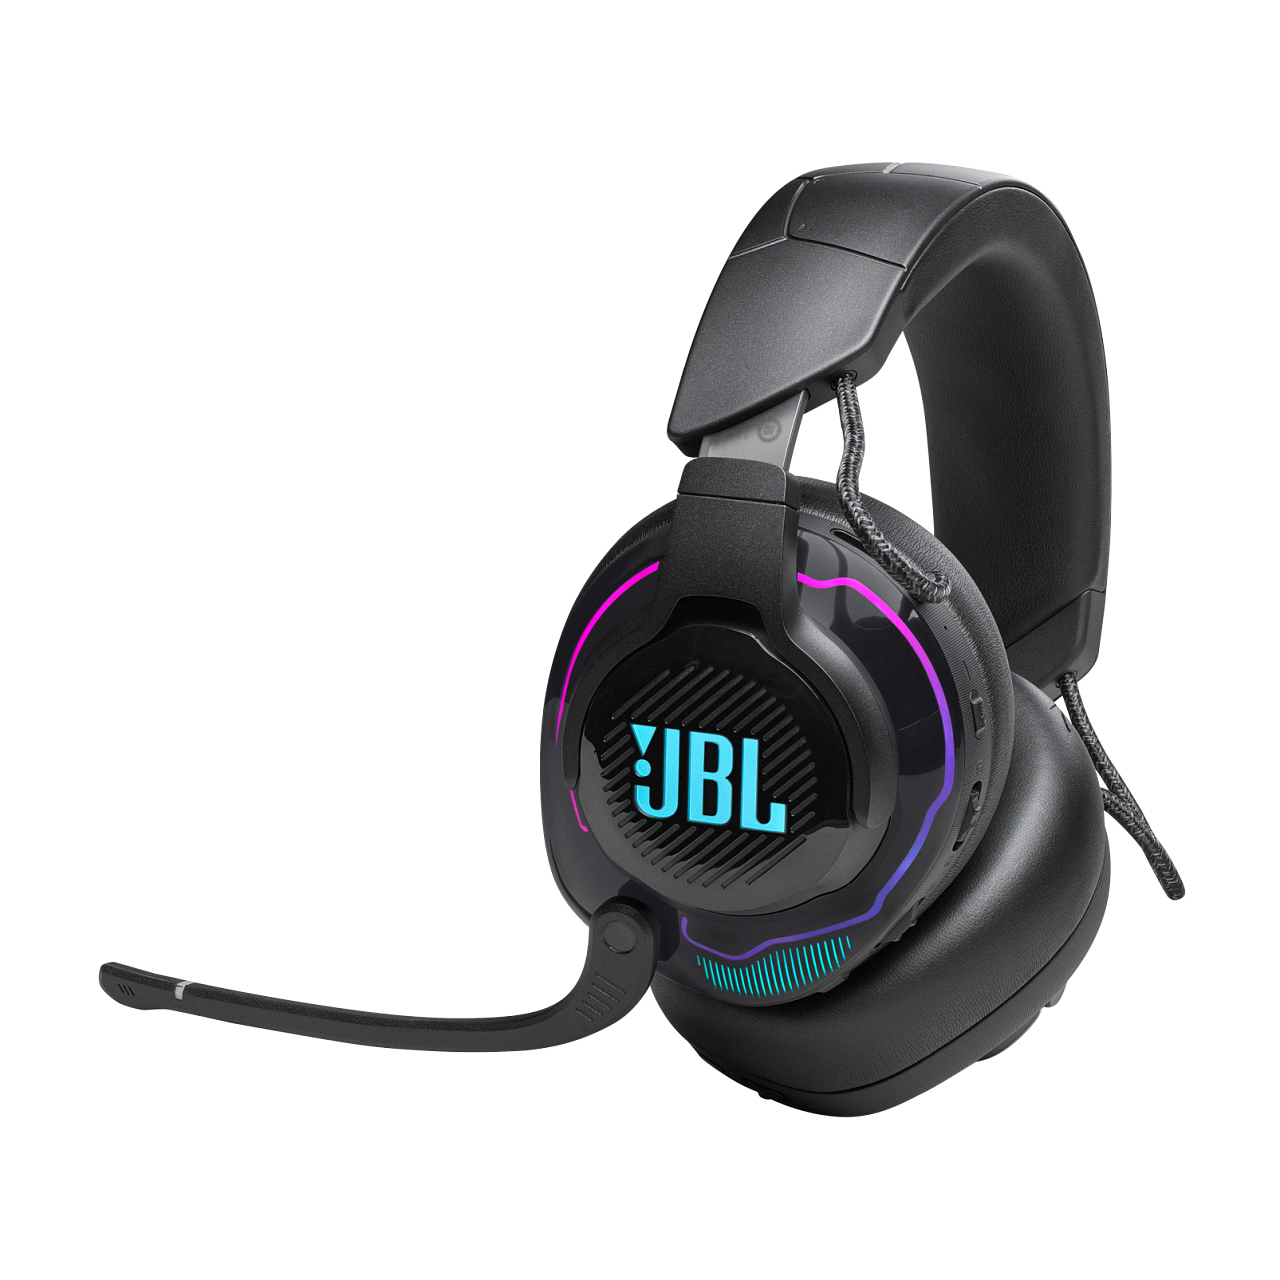 Bluetooth und Switch Quantum 910 XBOX, Headset Headset Handy, Gaming PS4/PS5, Over-ear JBL PC, Black für